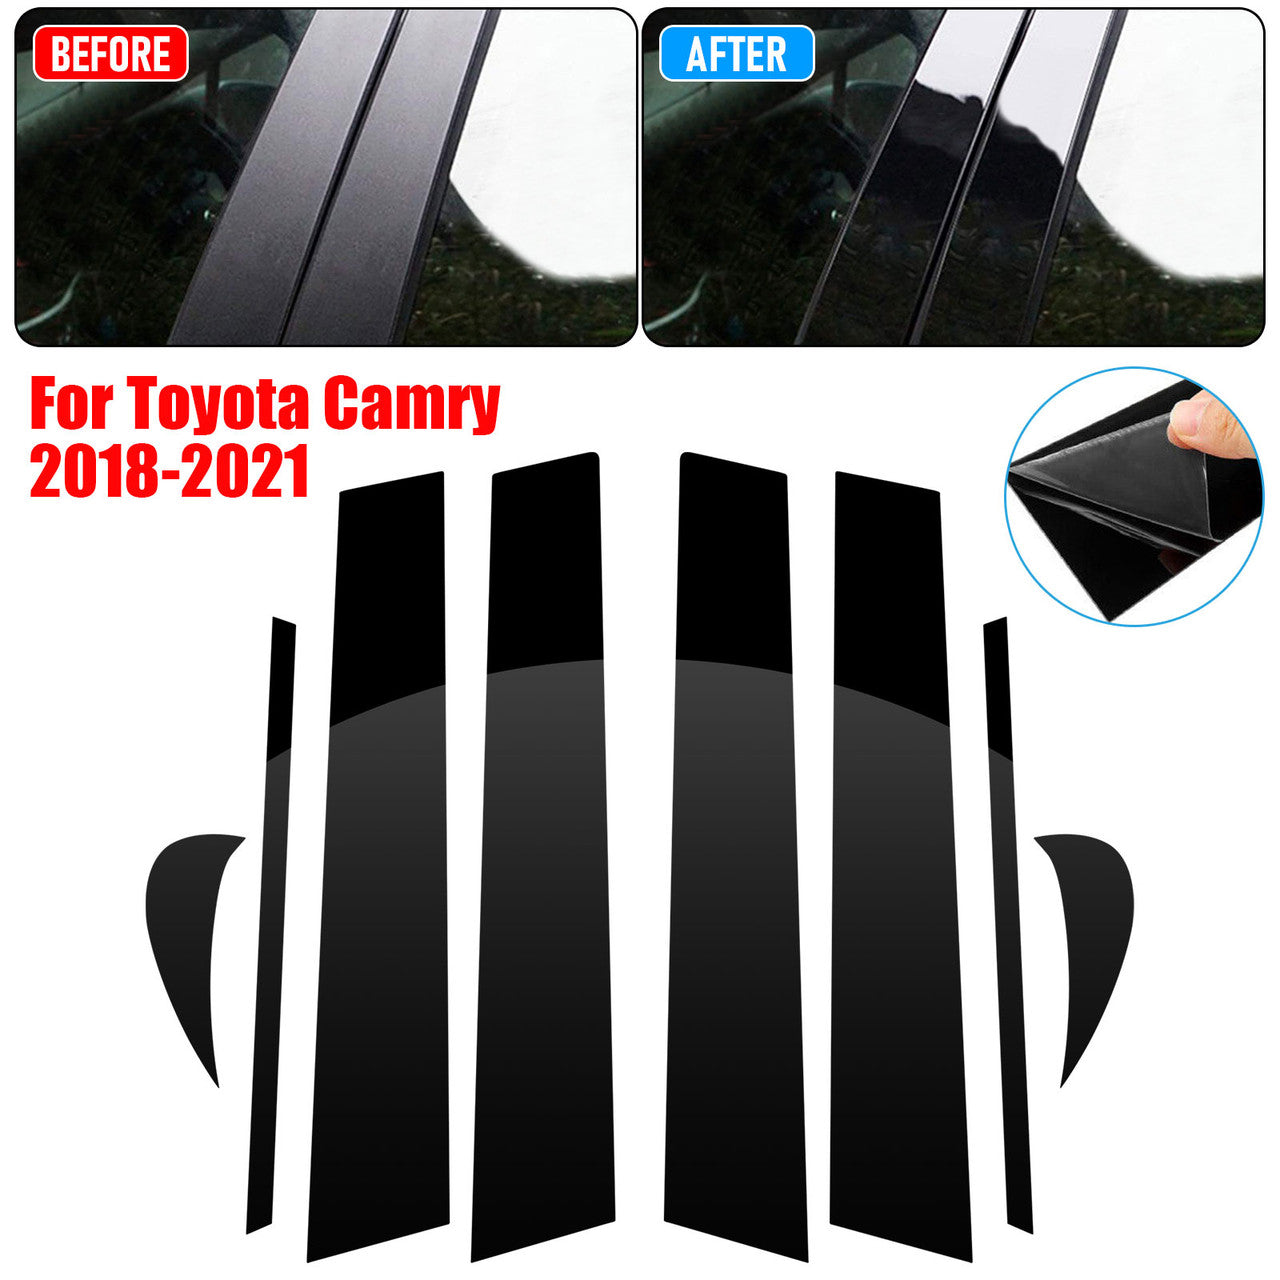 8 Pcs Window Door Trims Covers - Made of PC Mirror Abs Material W/ UV Coating Double-Sided Tape Fit for Toyota Camry 2018-2021 (Black)